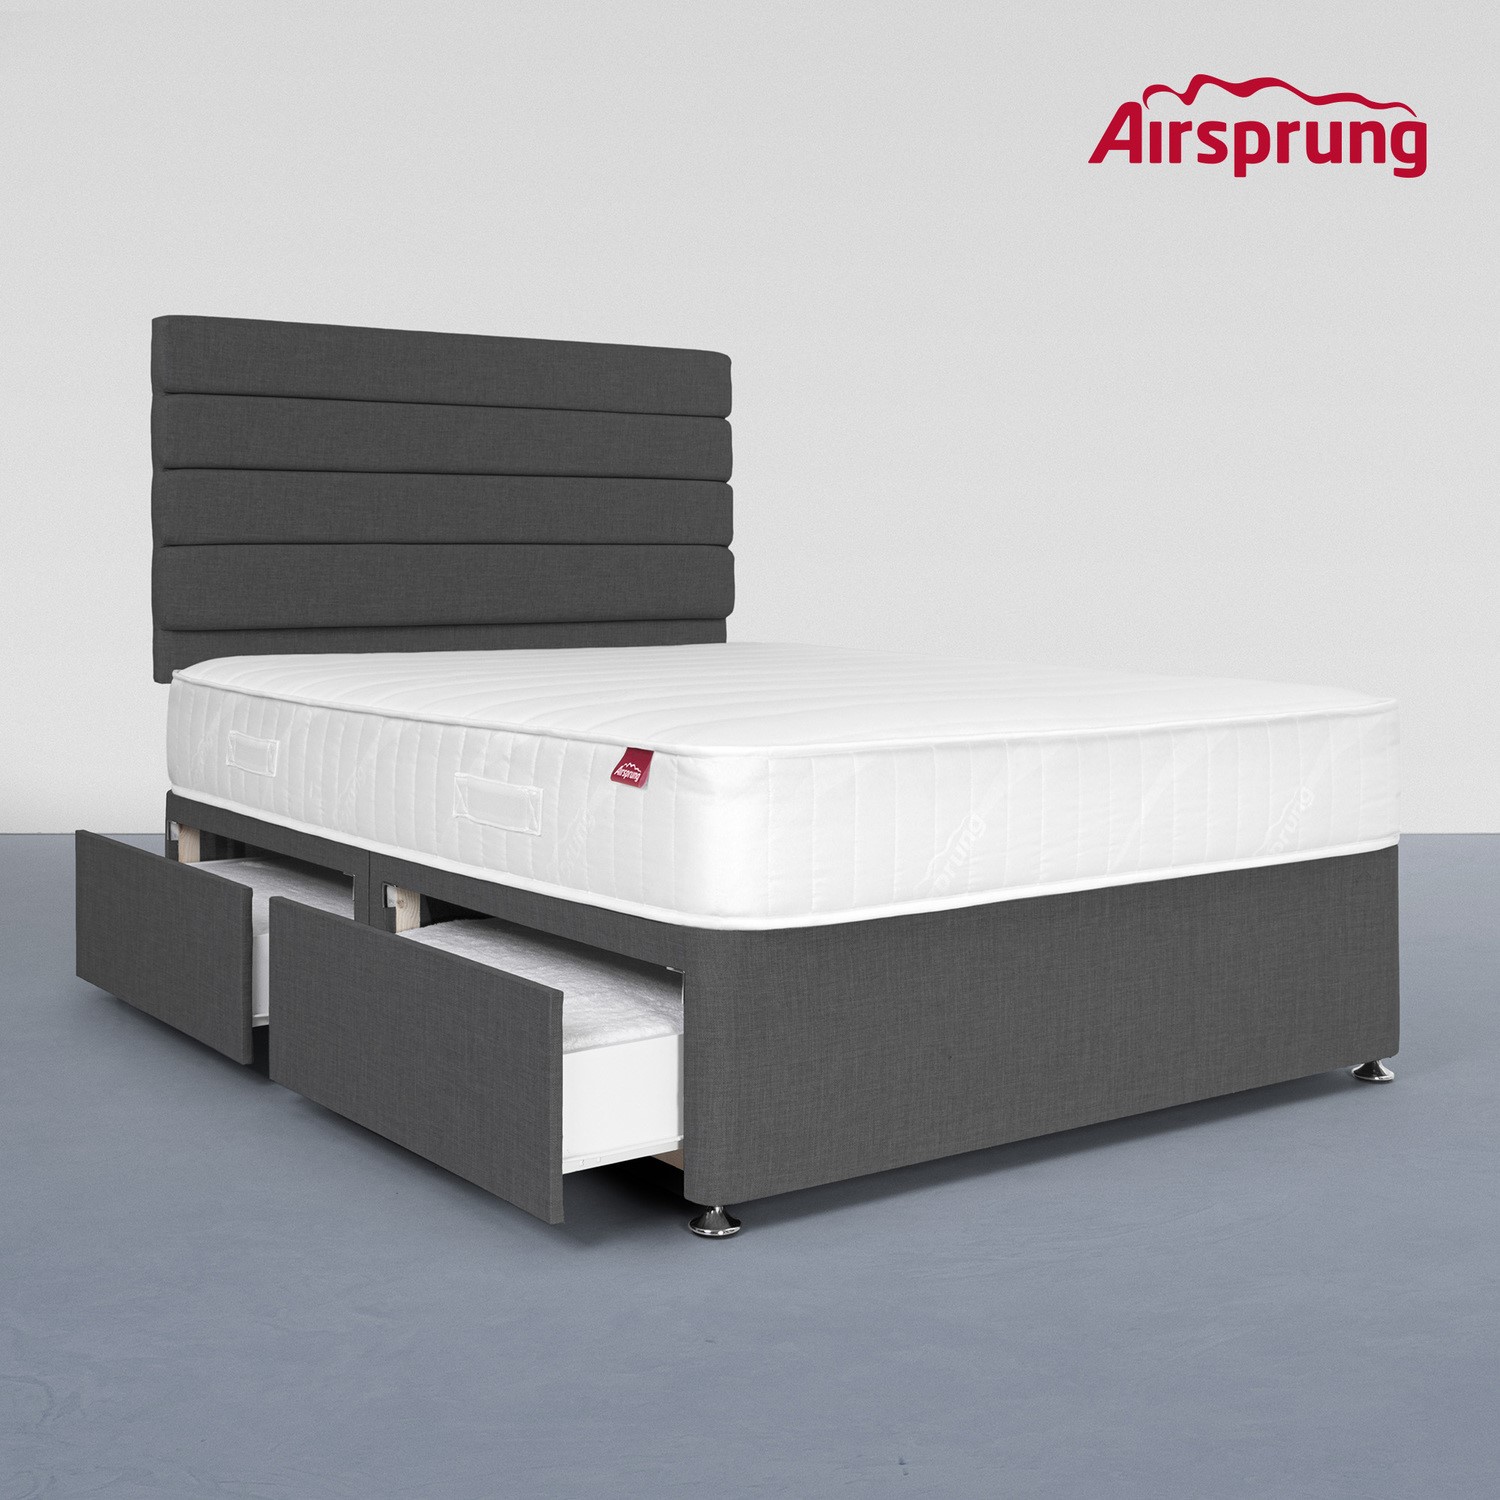 Read more about Airsprung small double 4 drawer divan bed with comfort mattress charcoal